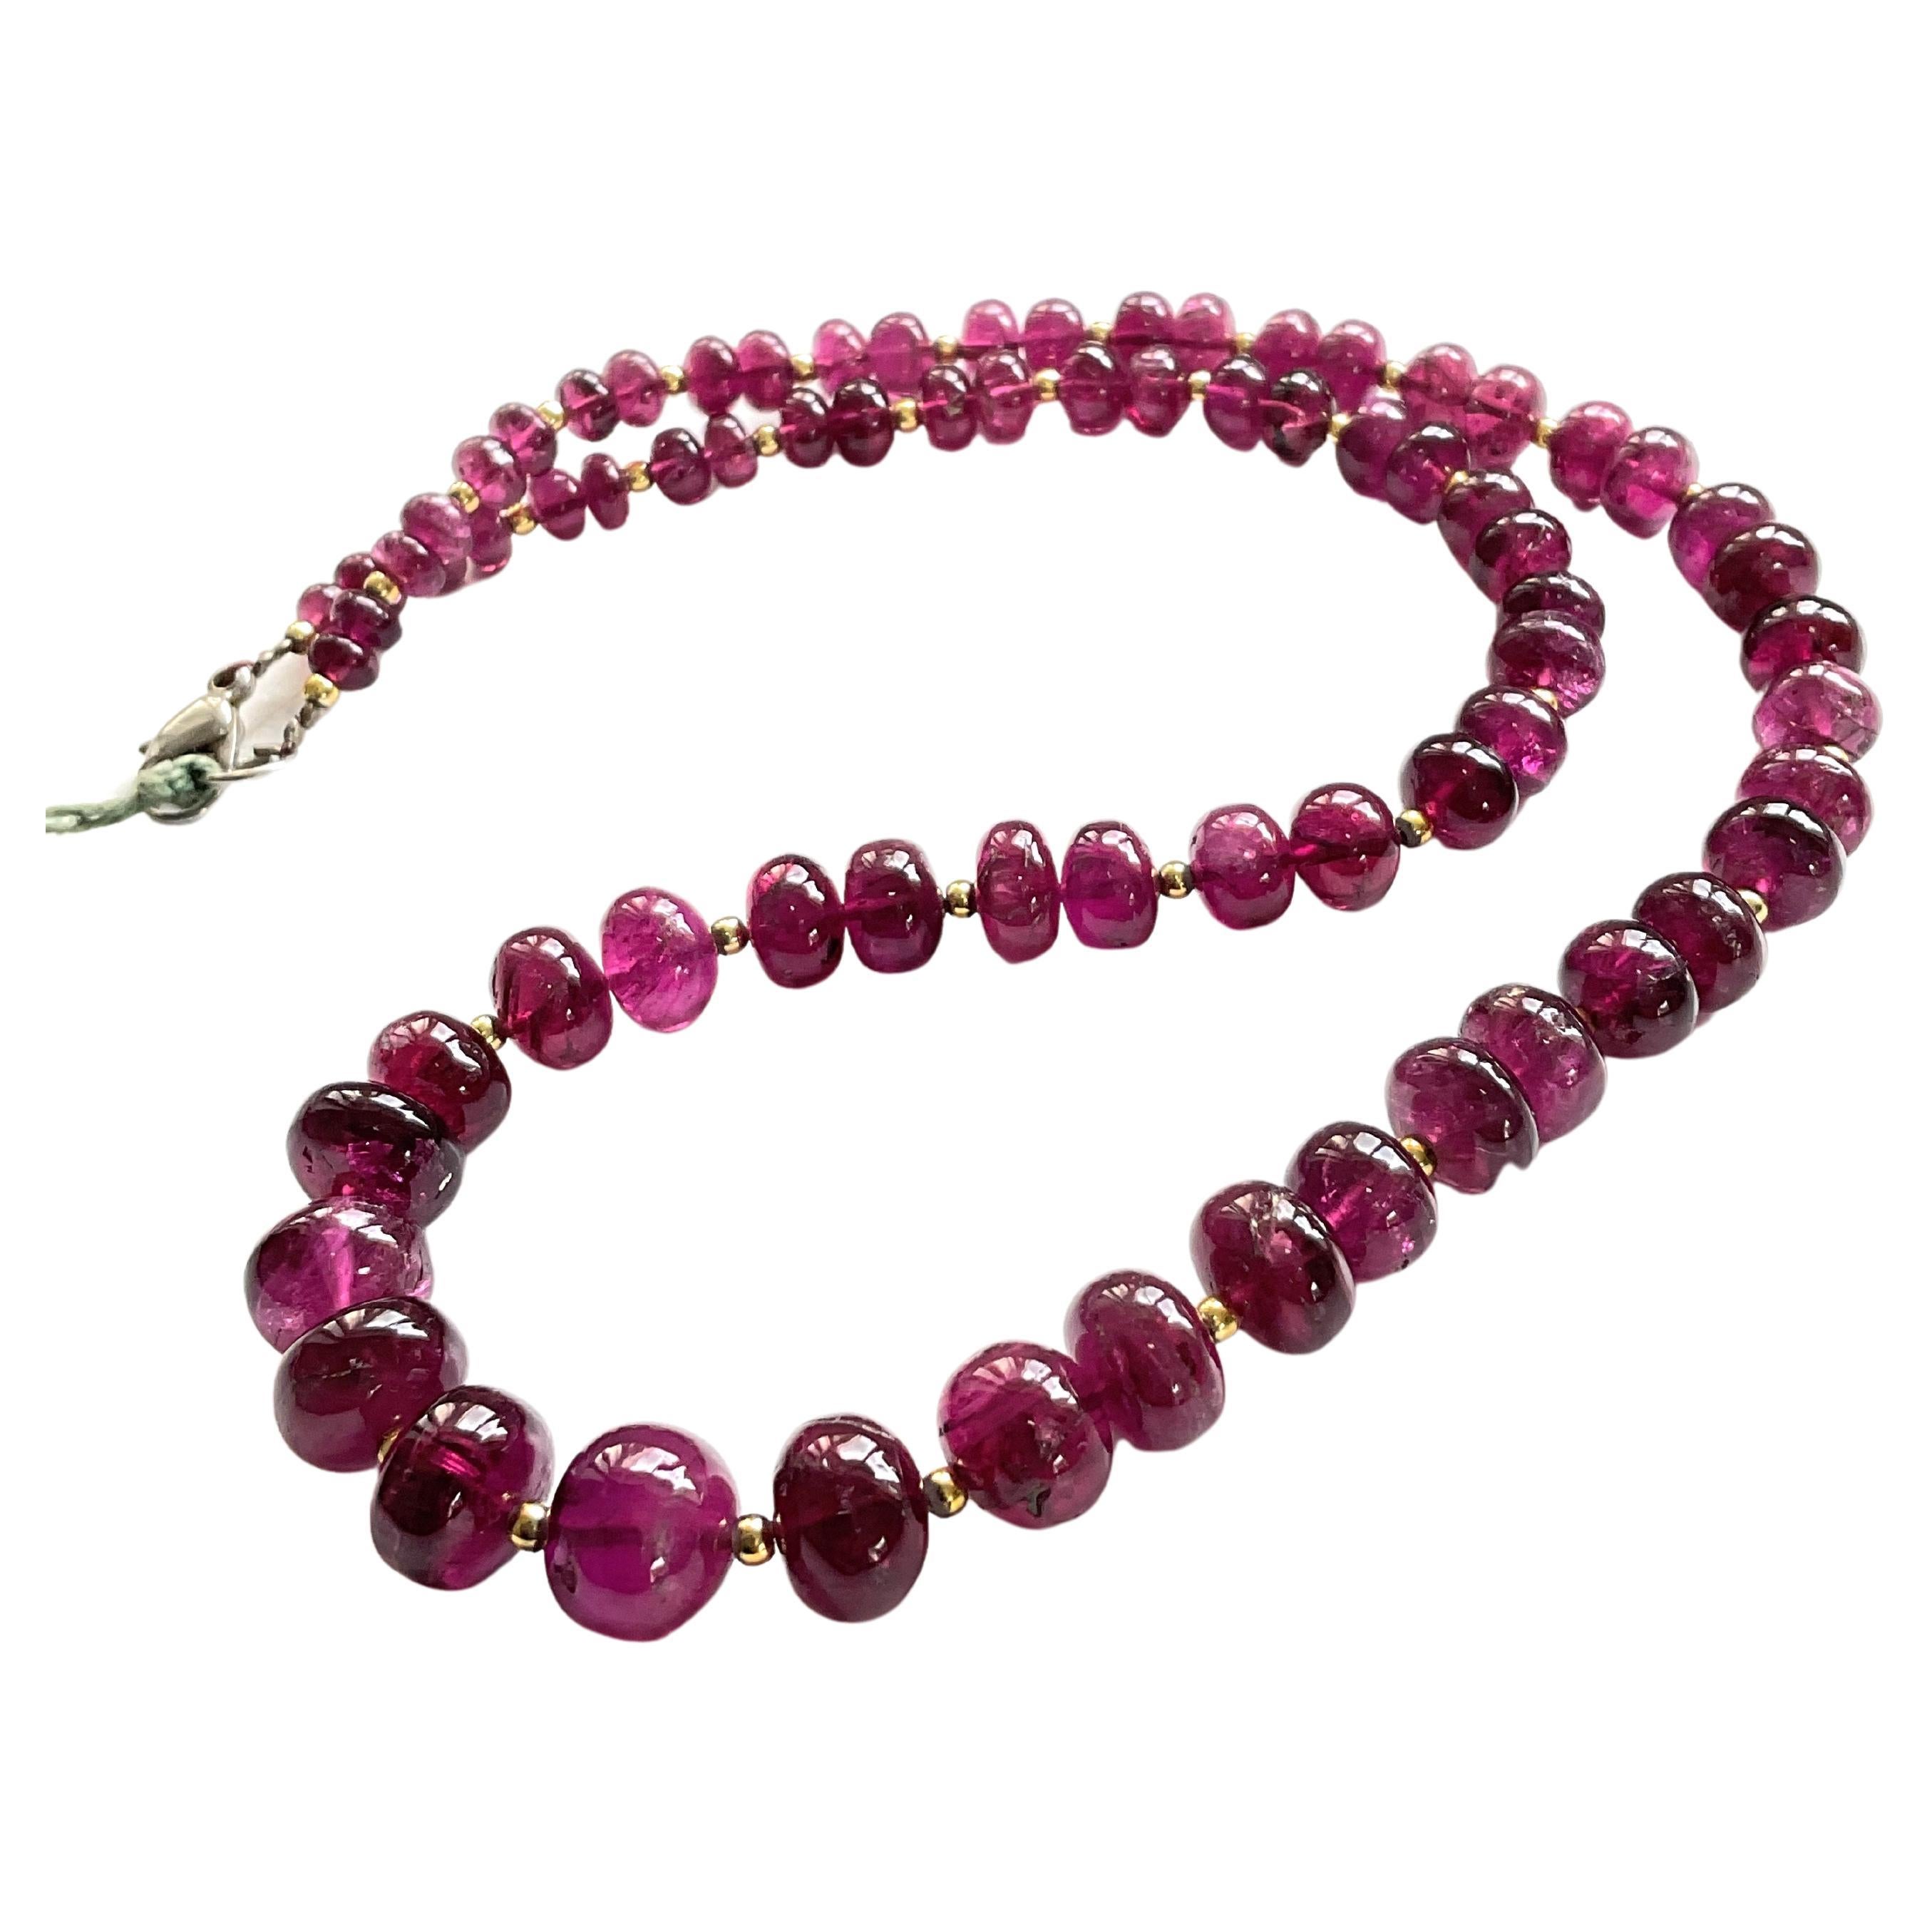 163.00 Carats Rubellite Tourmaline Plain Beads For Top Fine Jewelry Natural Gem For Sale